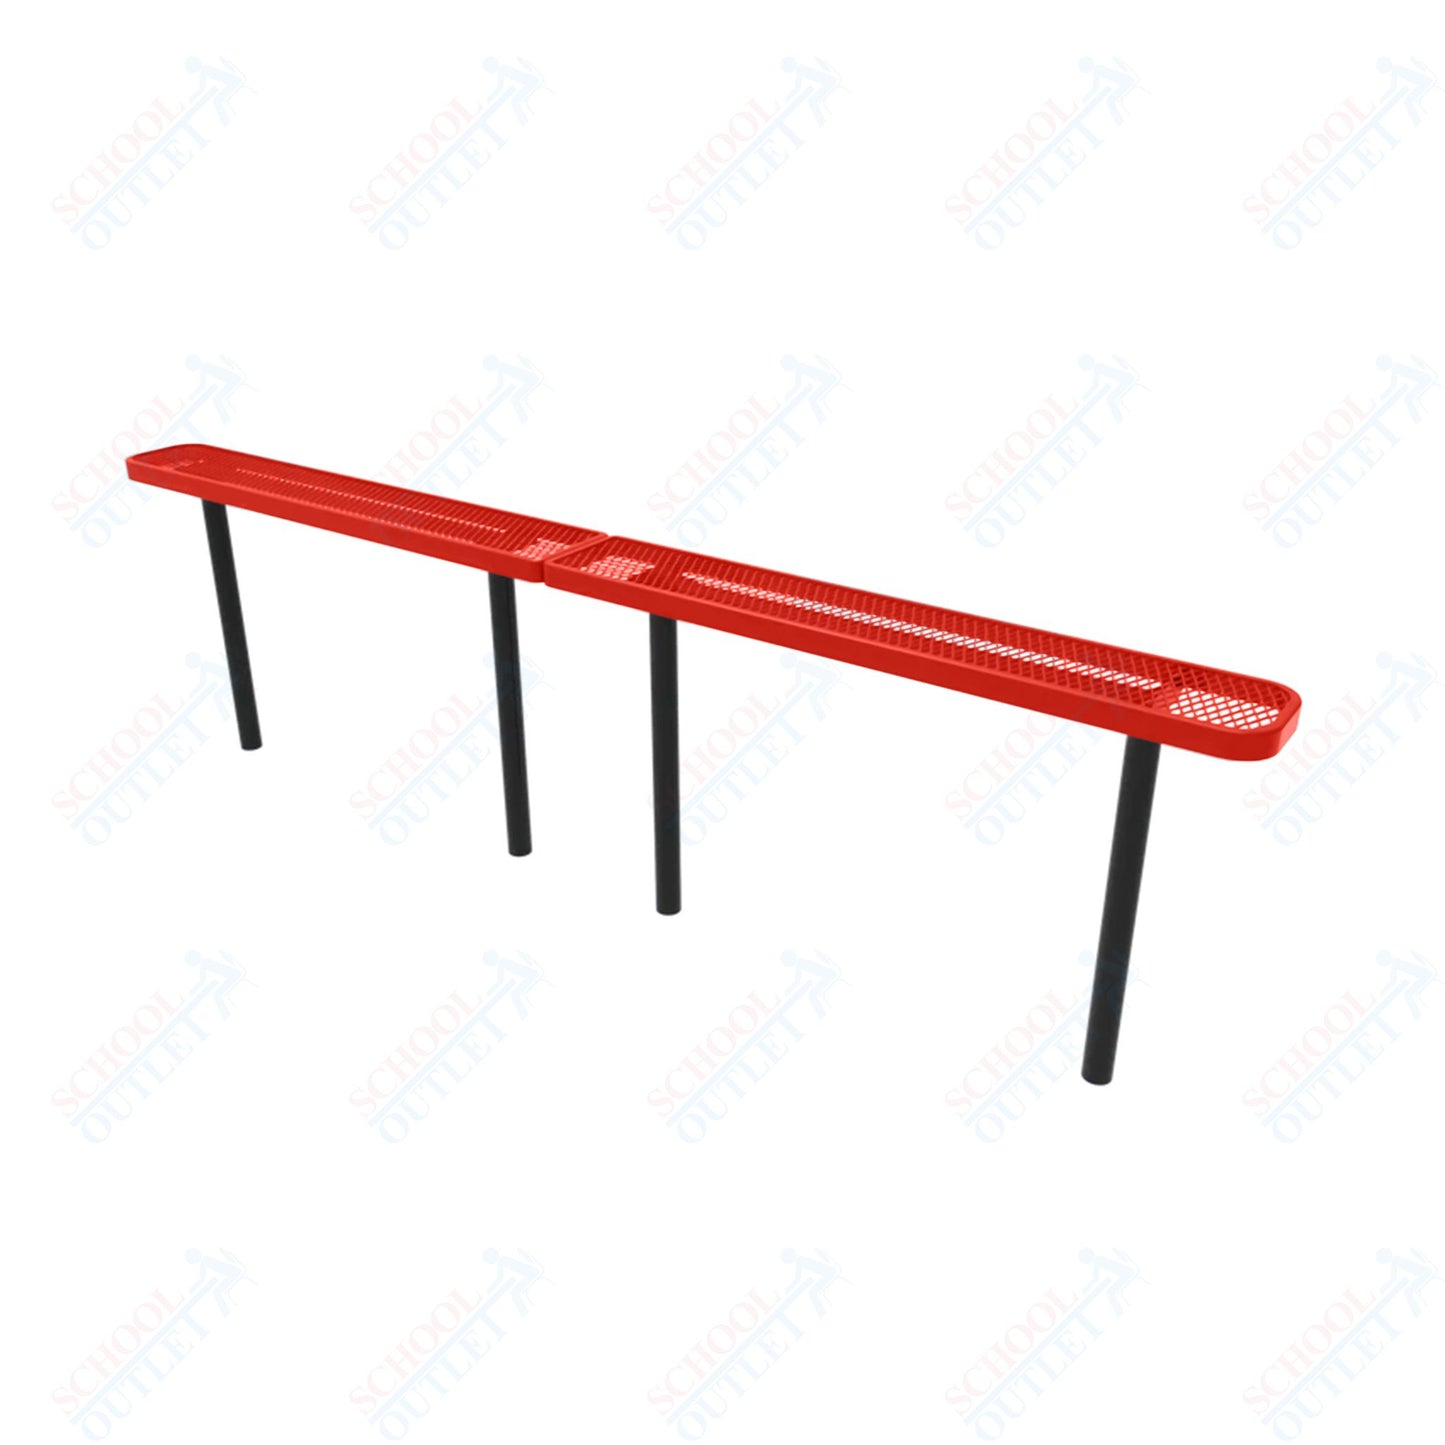 MyTcoat - Standard Outdoor Bench with Back - Inground Mount 10' L (MYT-BRT10-22)